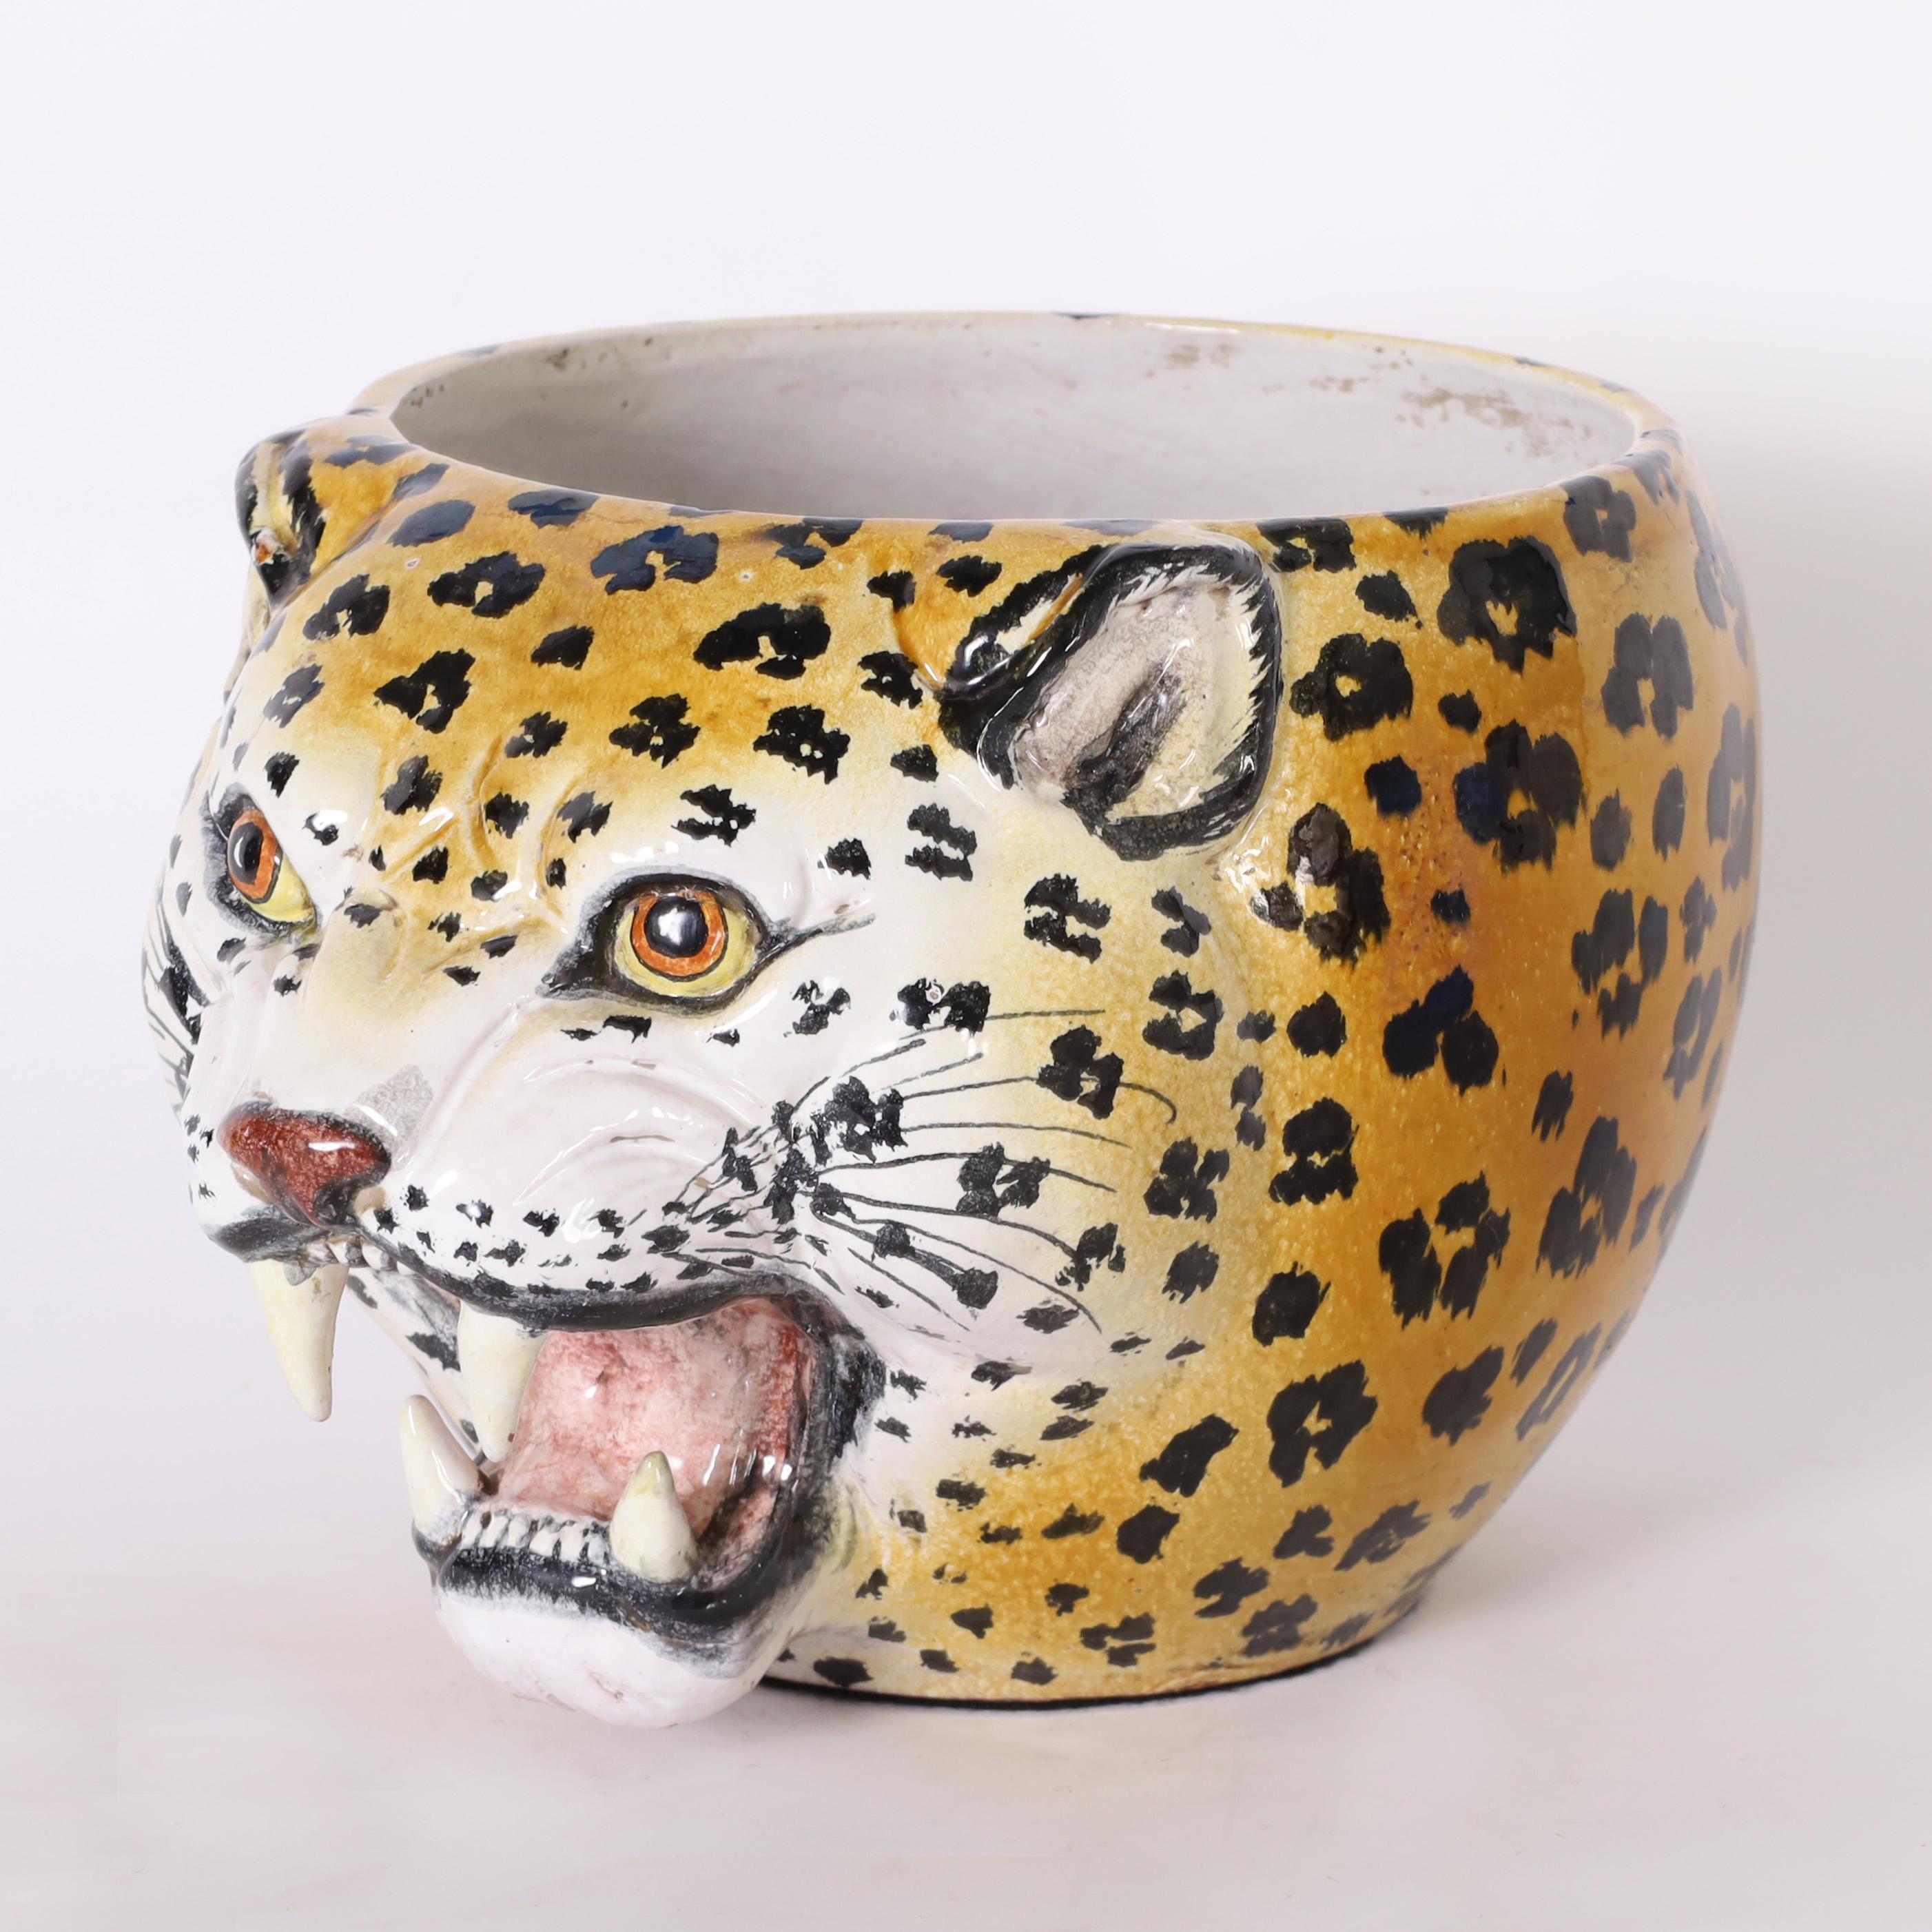 Unusual mid century Italian bowl crafted in terra cotta with a snarling leopard head hand decorated and glazed. 